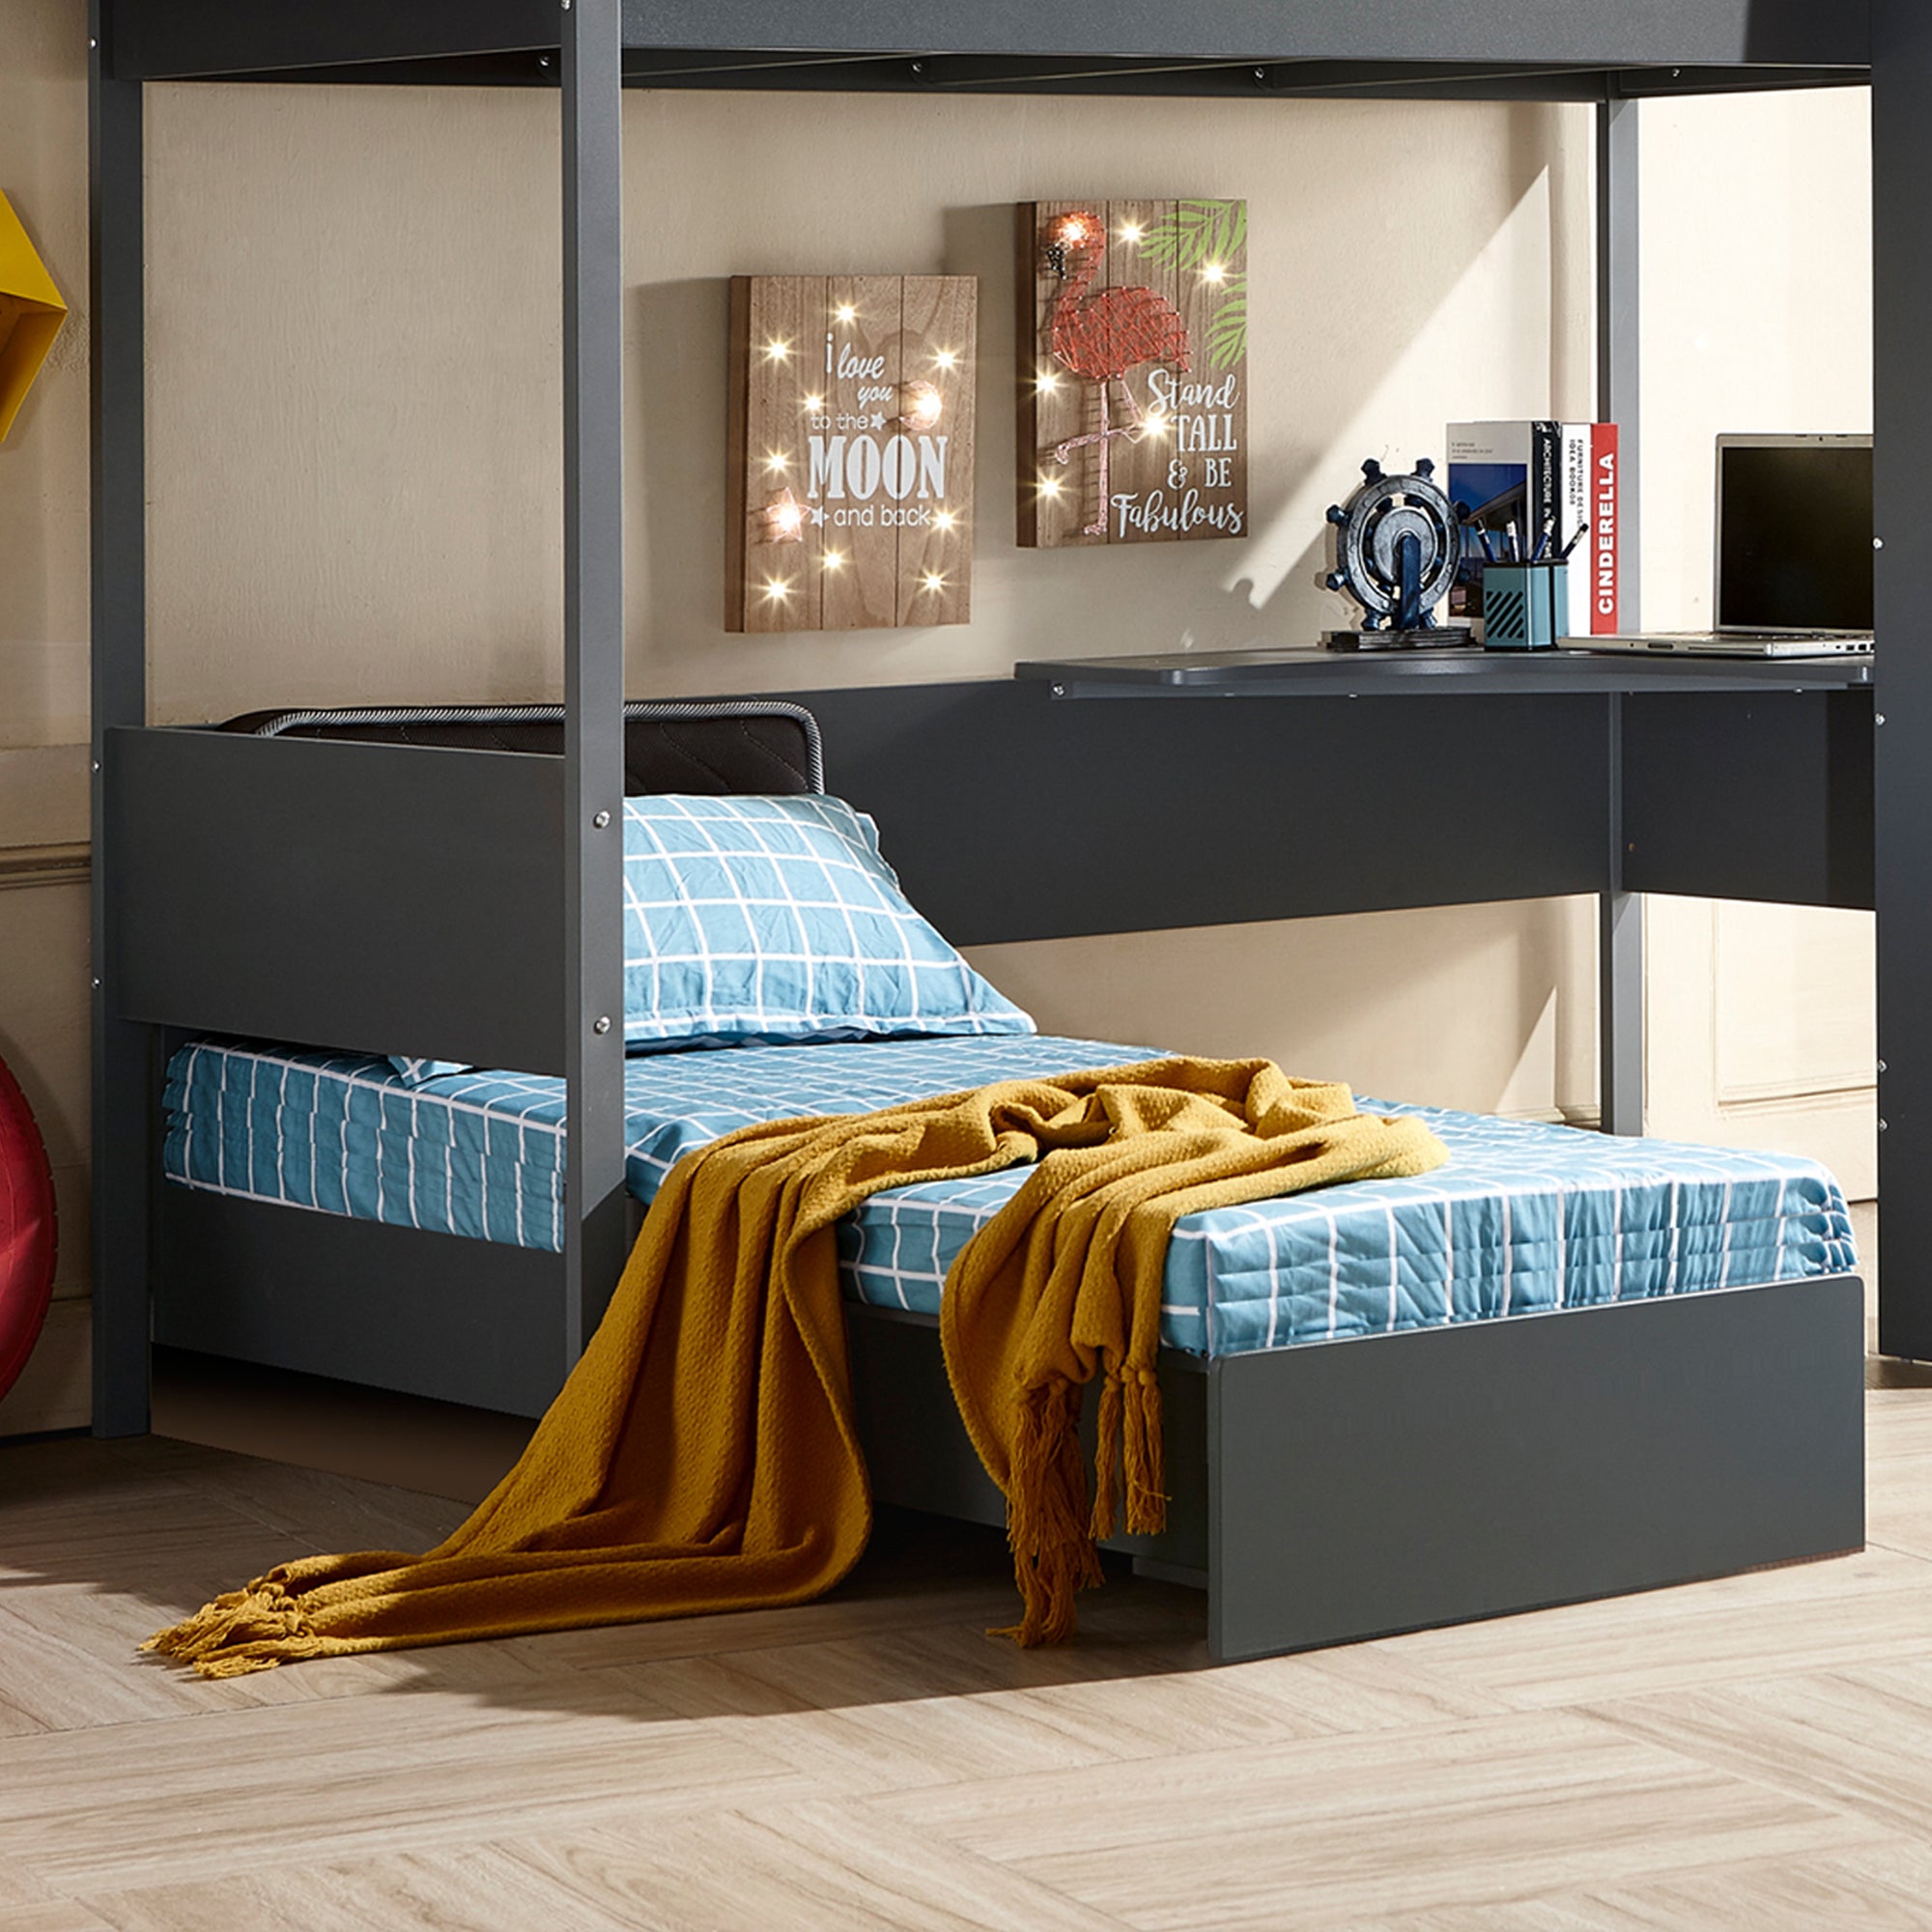 Roy Bunk Bed with Drawer Storage Wooden Bed Furniture for Bedroom Living Room Home